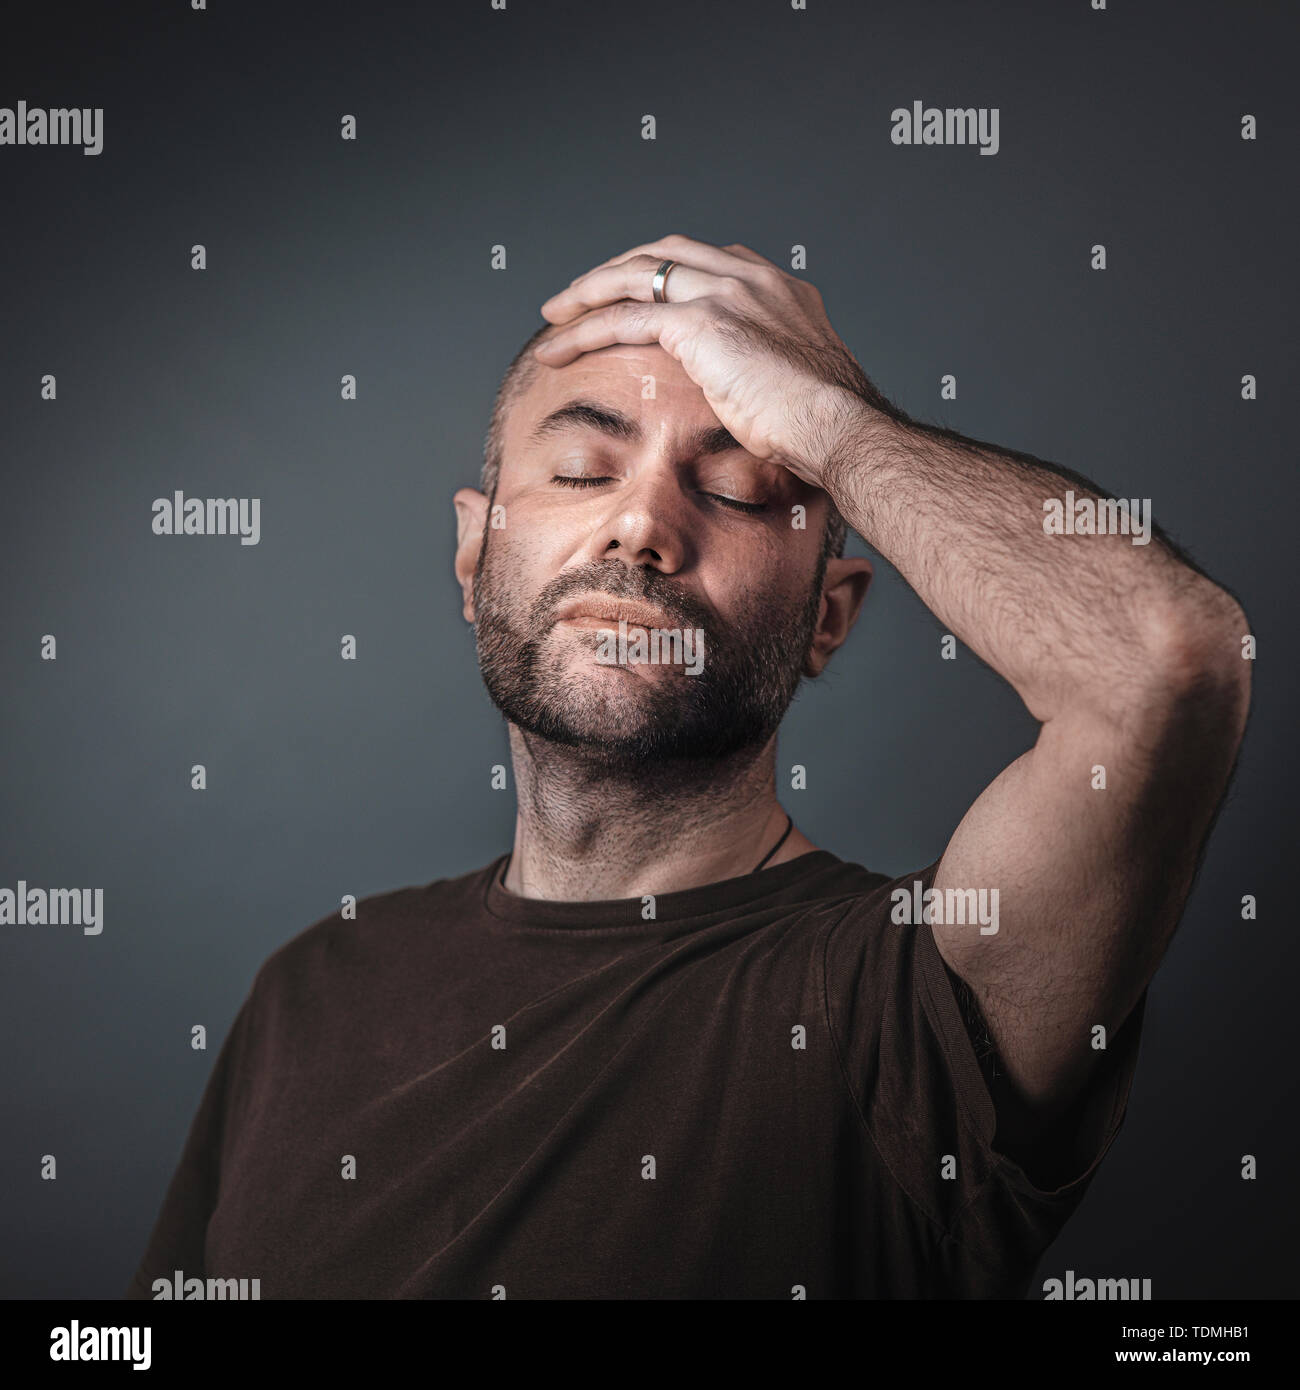 portrait of caucasian man with beard and short shackles, hand on forehead and eyes closed. Studio shot. Stock Photo